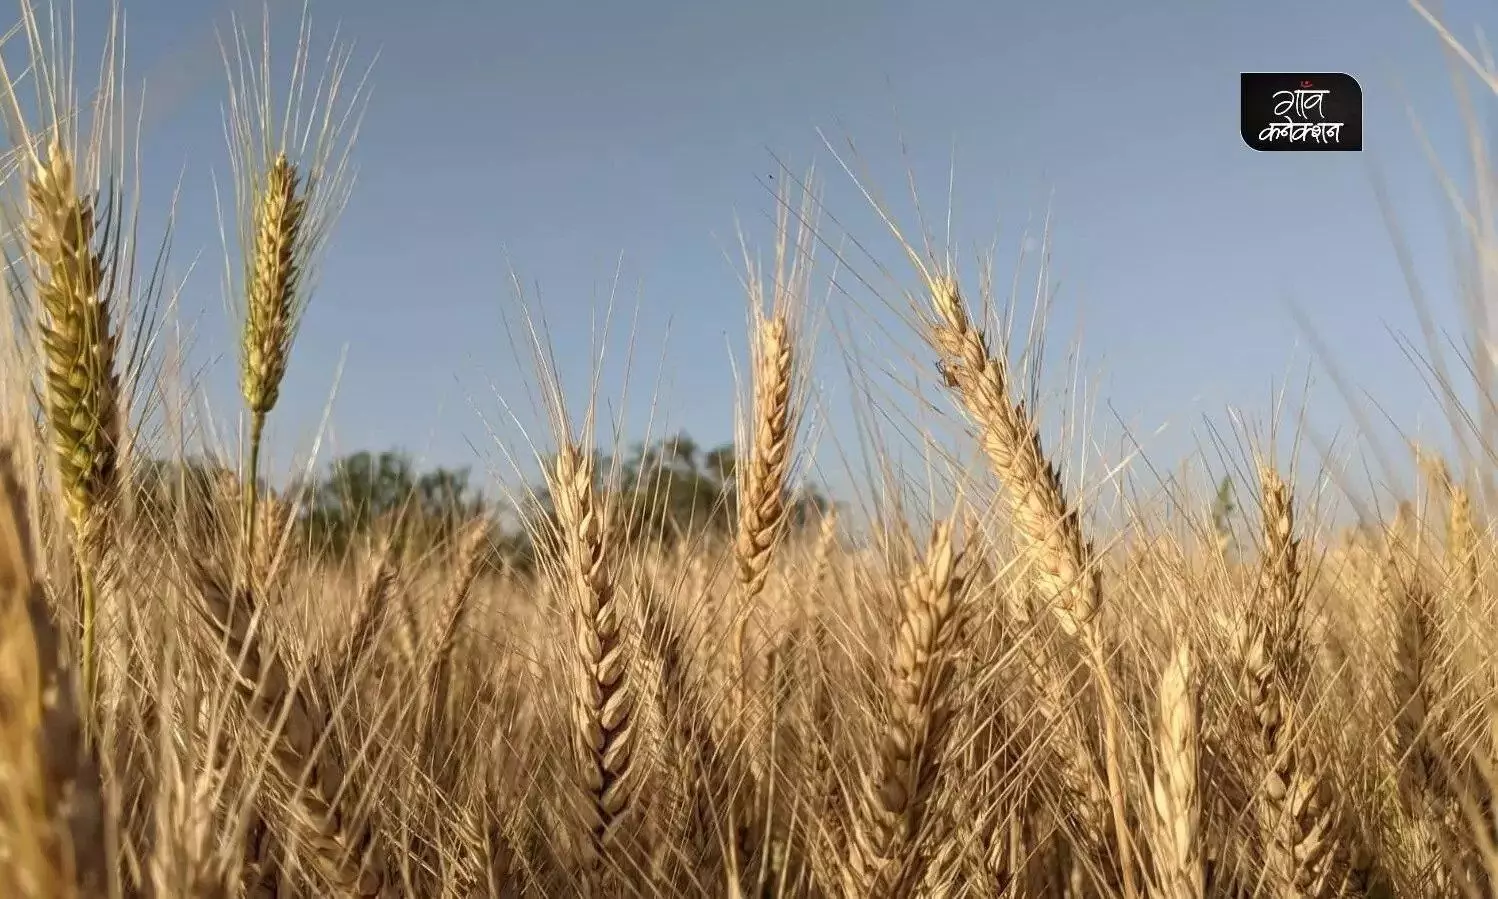 India prohibits wheat exports: Is it too little, too late?